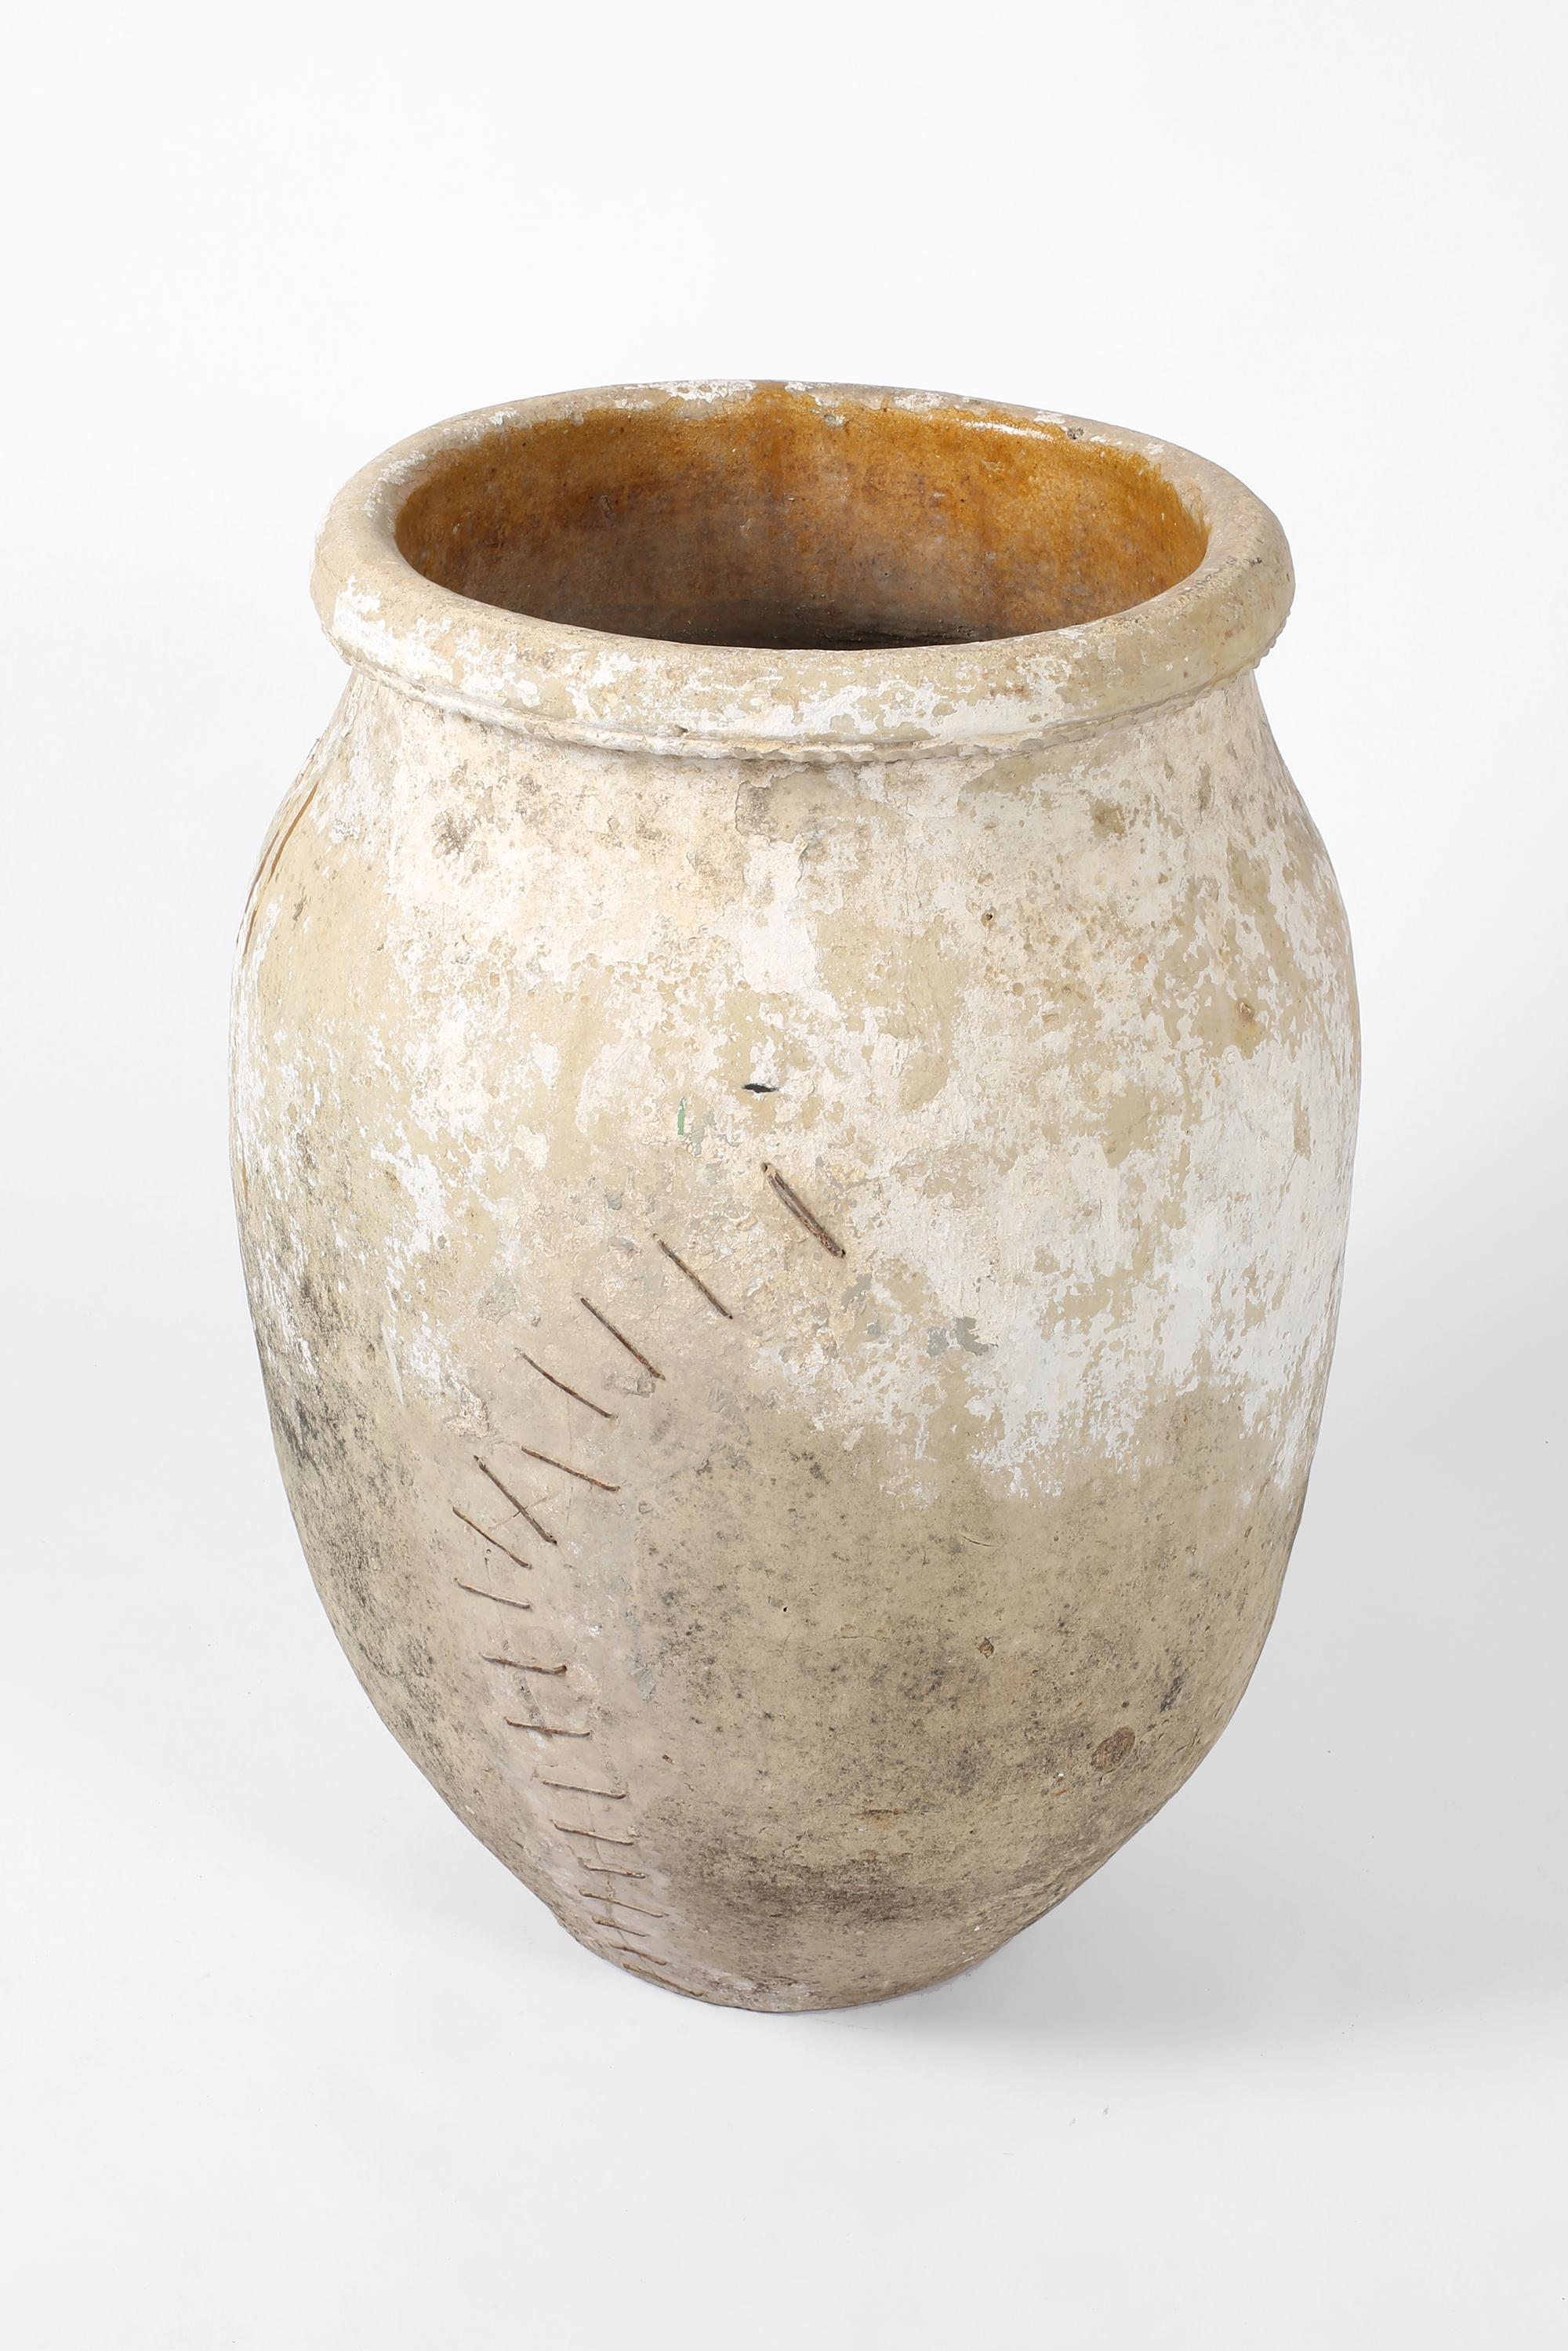 A large and fantastically patinated earthenware jar with characterful iron staple repairs and remnants of lime. From the province of Córdoba in Andalusia. Spanish, c. 1800.